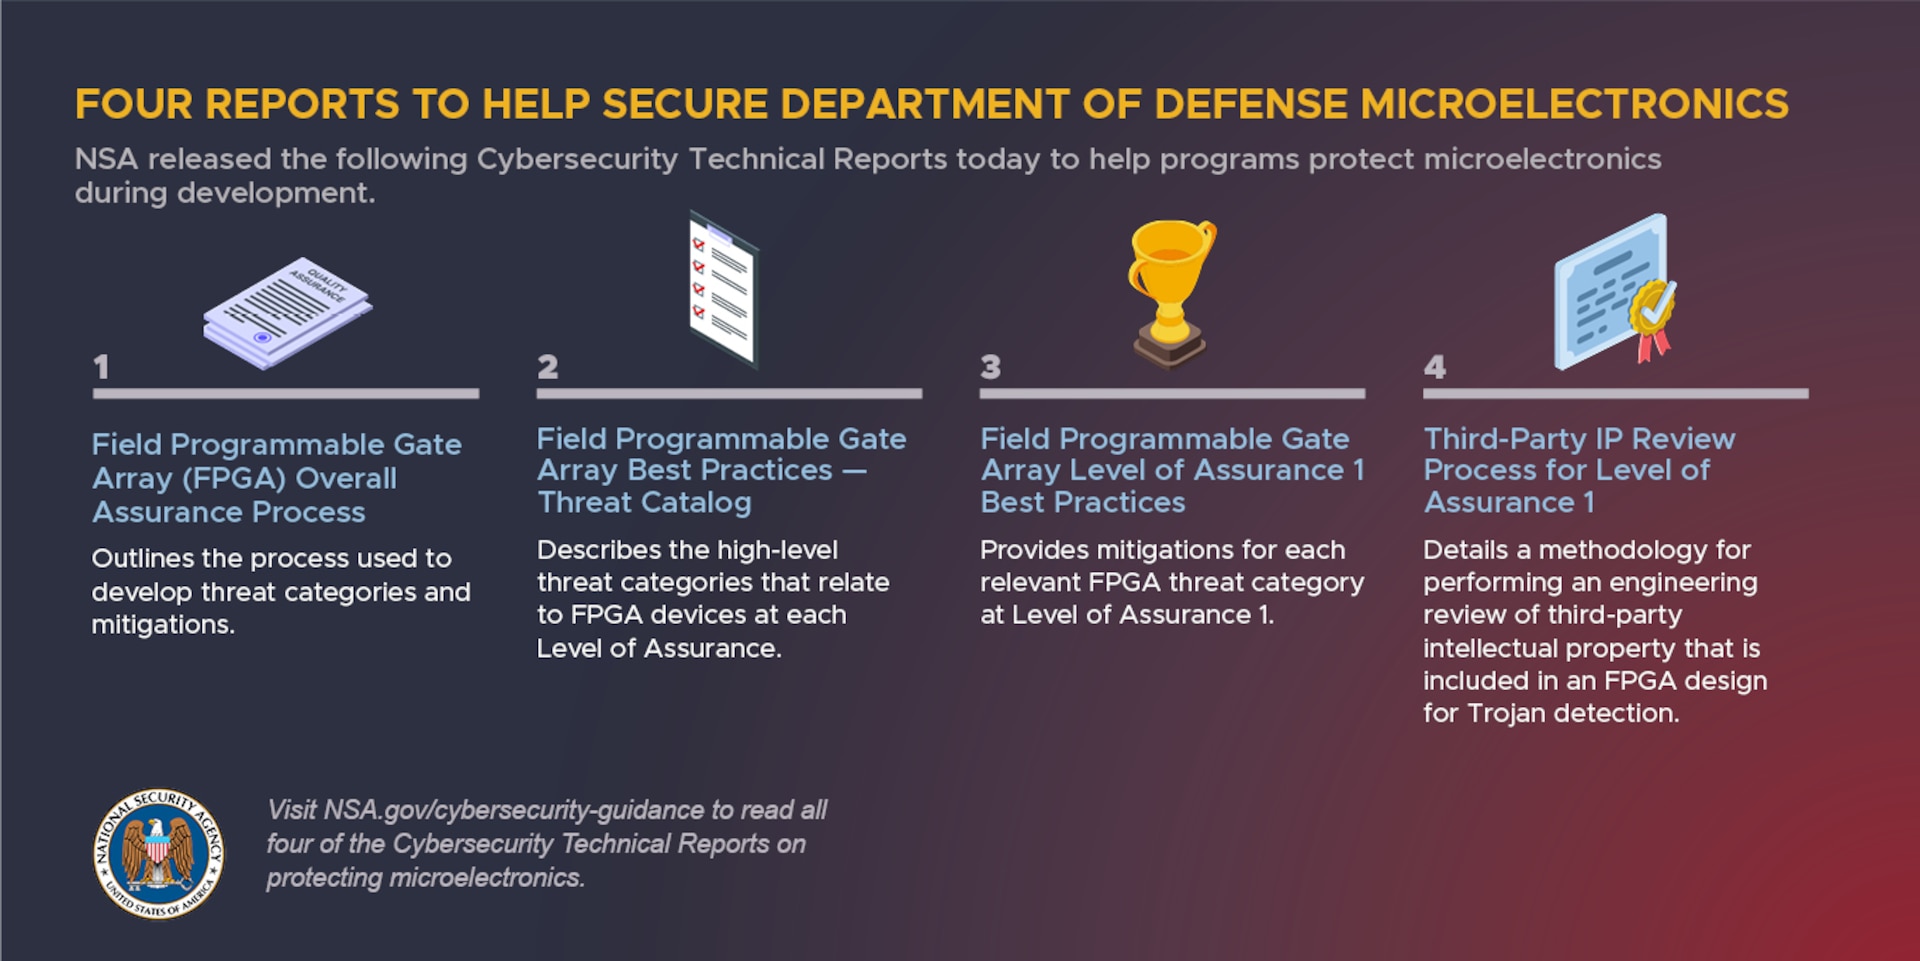 An infographic on a blue and red gradient background titled "Four Reports to Help Secure Department of Defense Microelectronics"